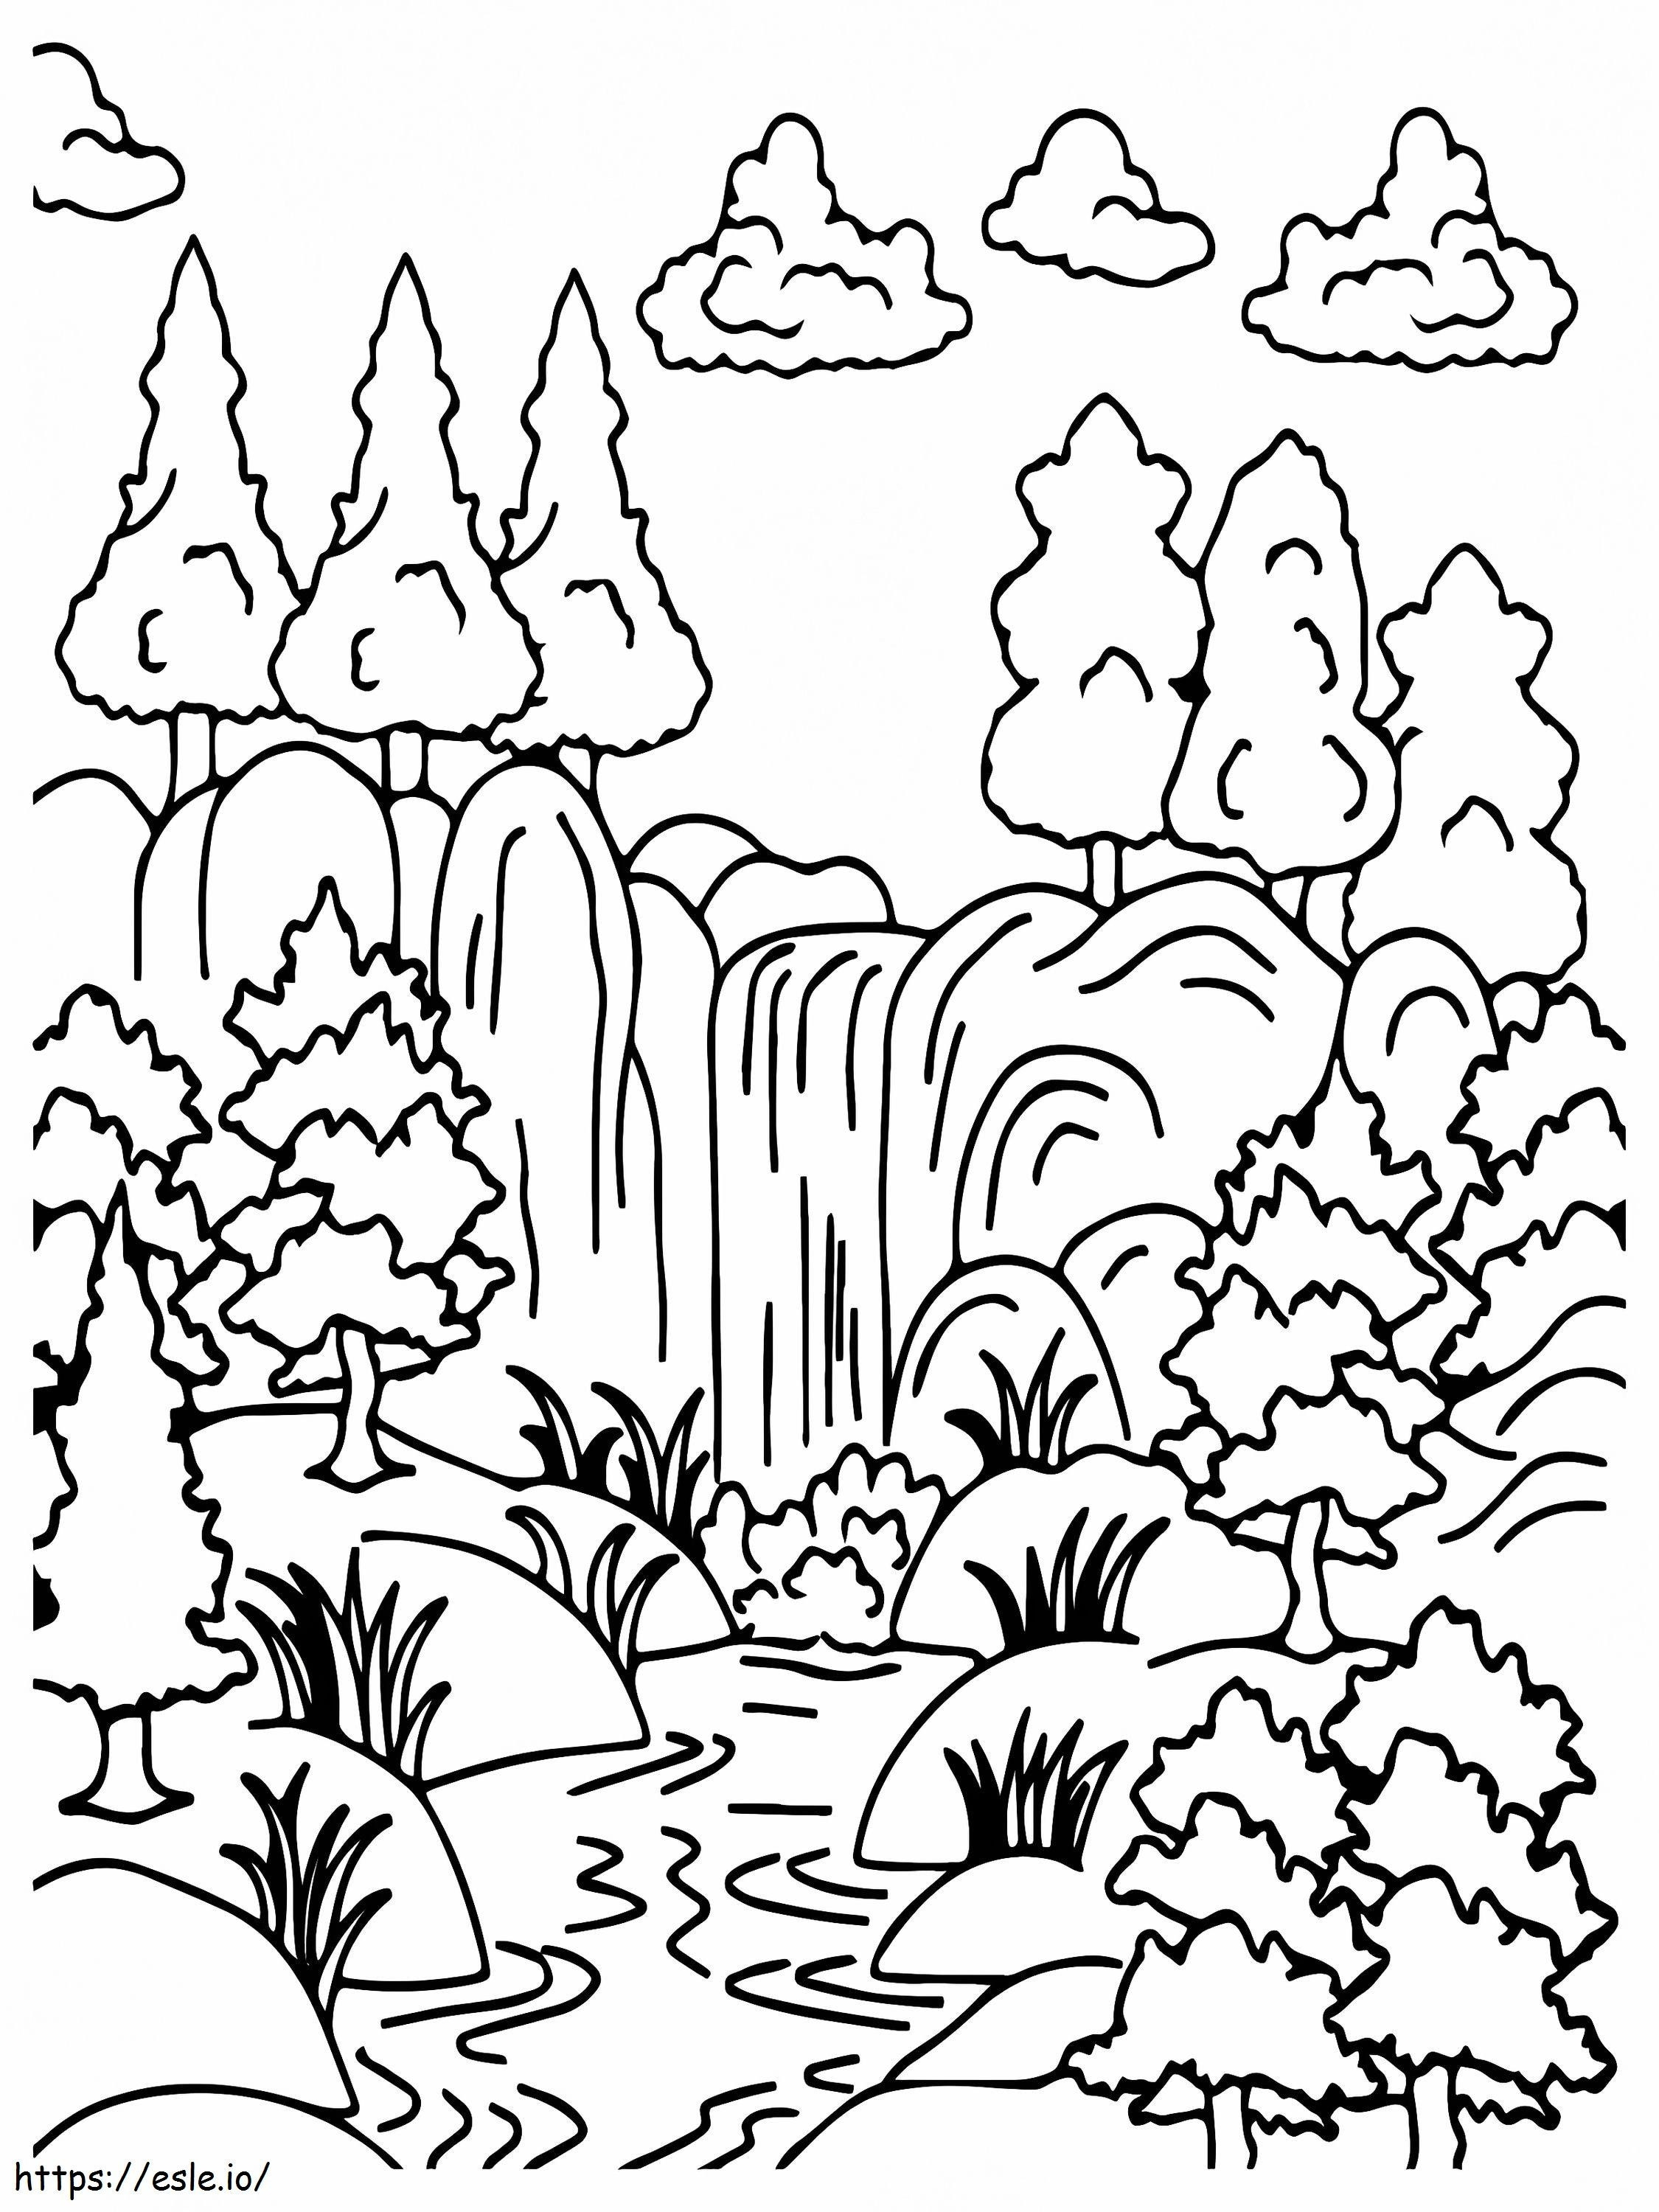 Forest Waterfall coloring page